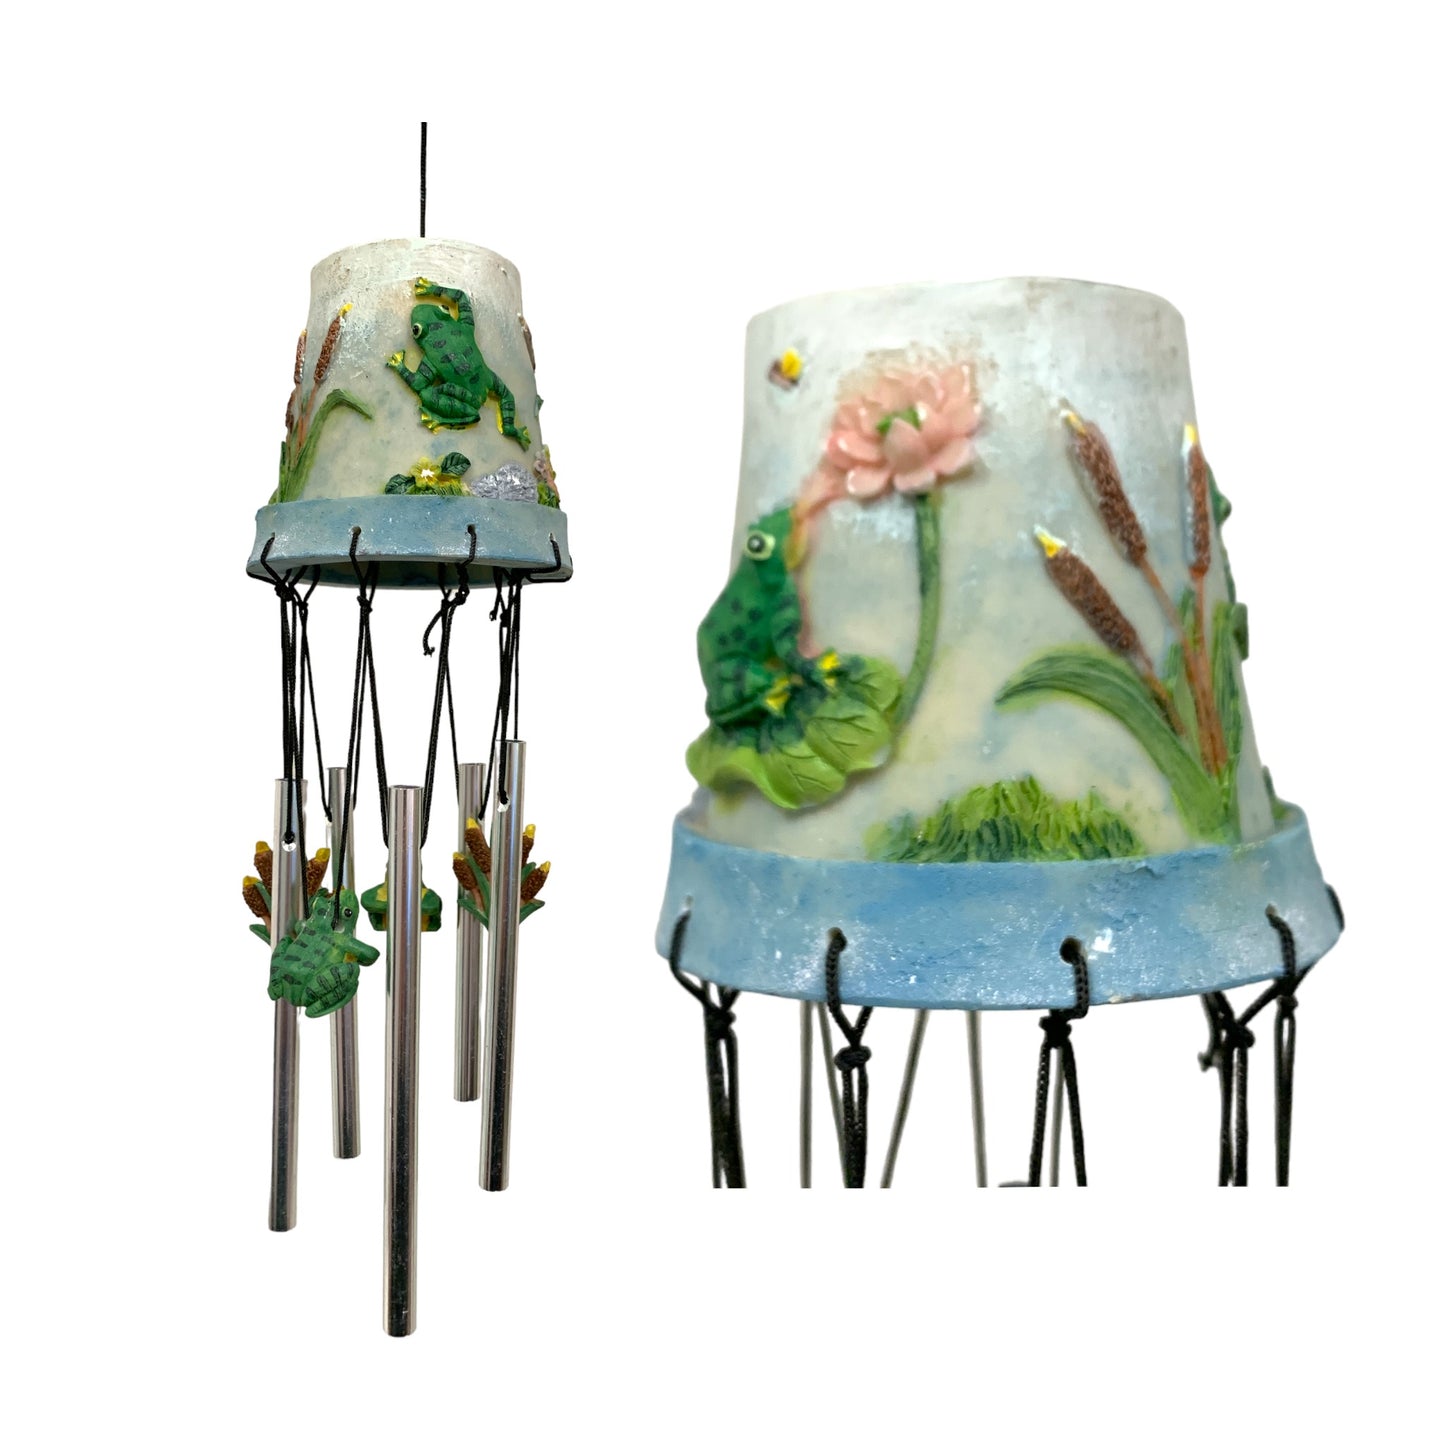 FLOWER POT WIND CHIME - 12 INCH - FROGS AND BULLRUSH